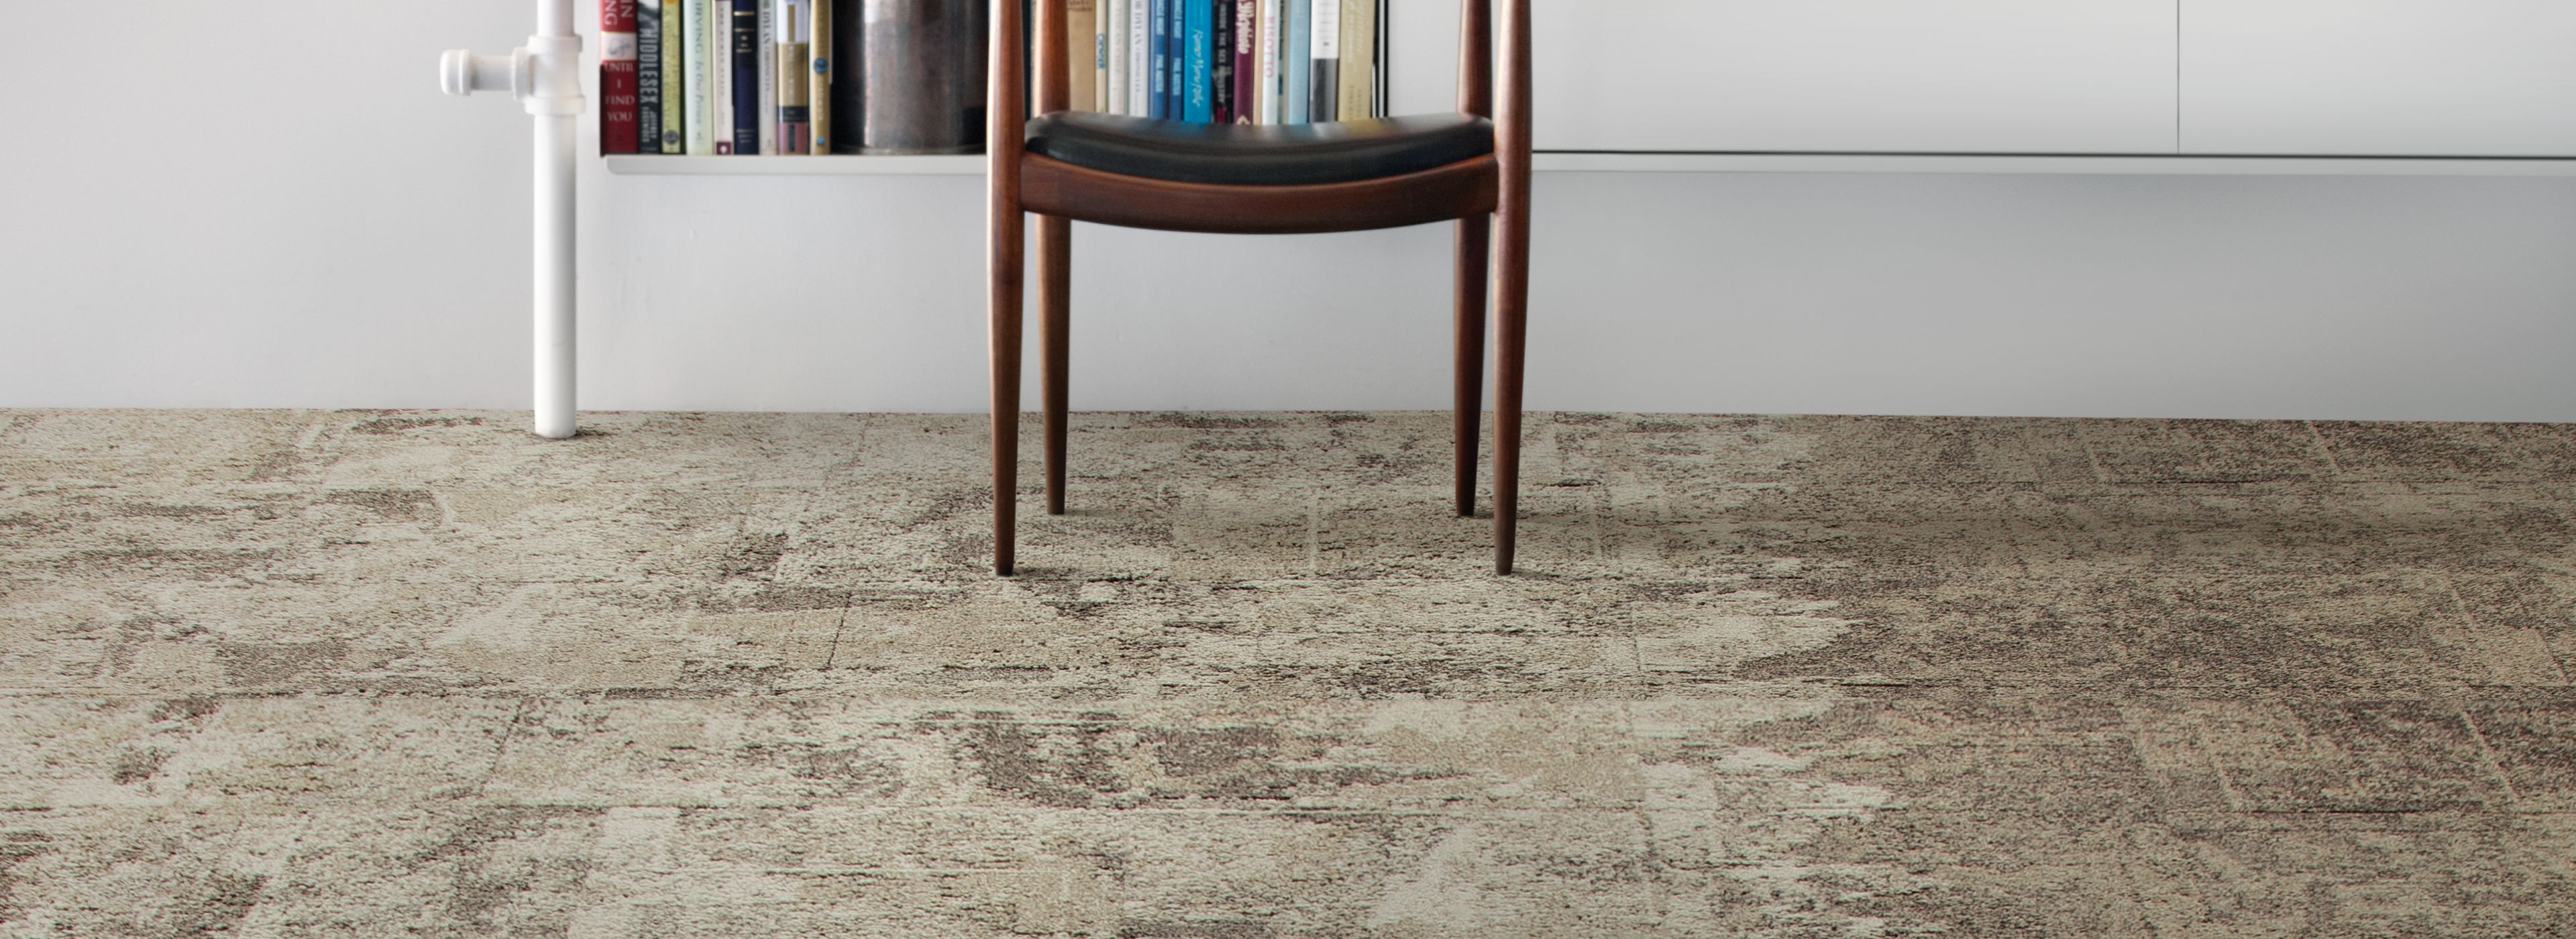 Interface B601, B602 and B603 carpet tile in library with wooden chair imagen número 1